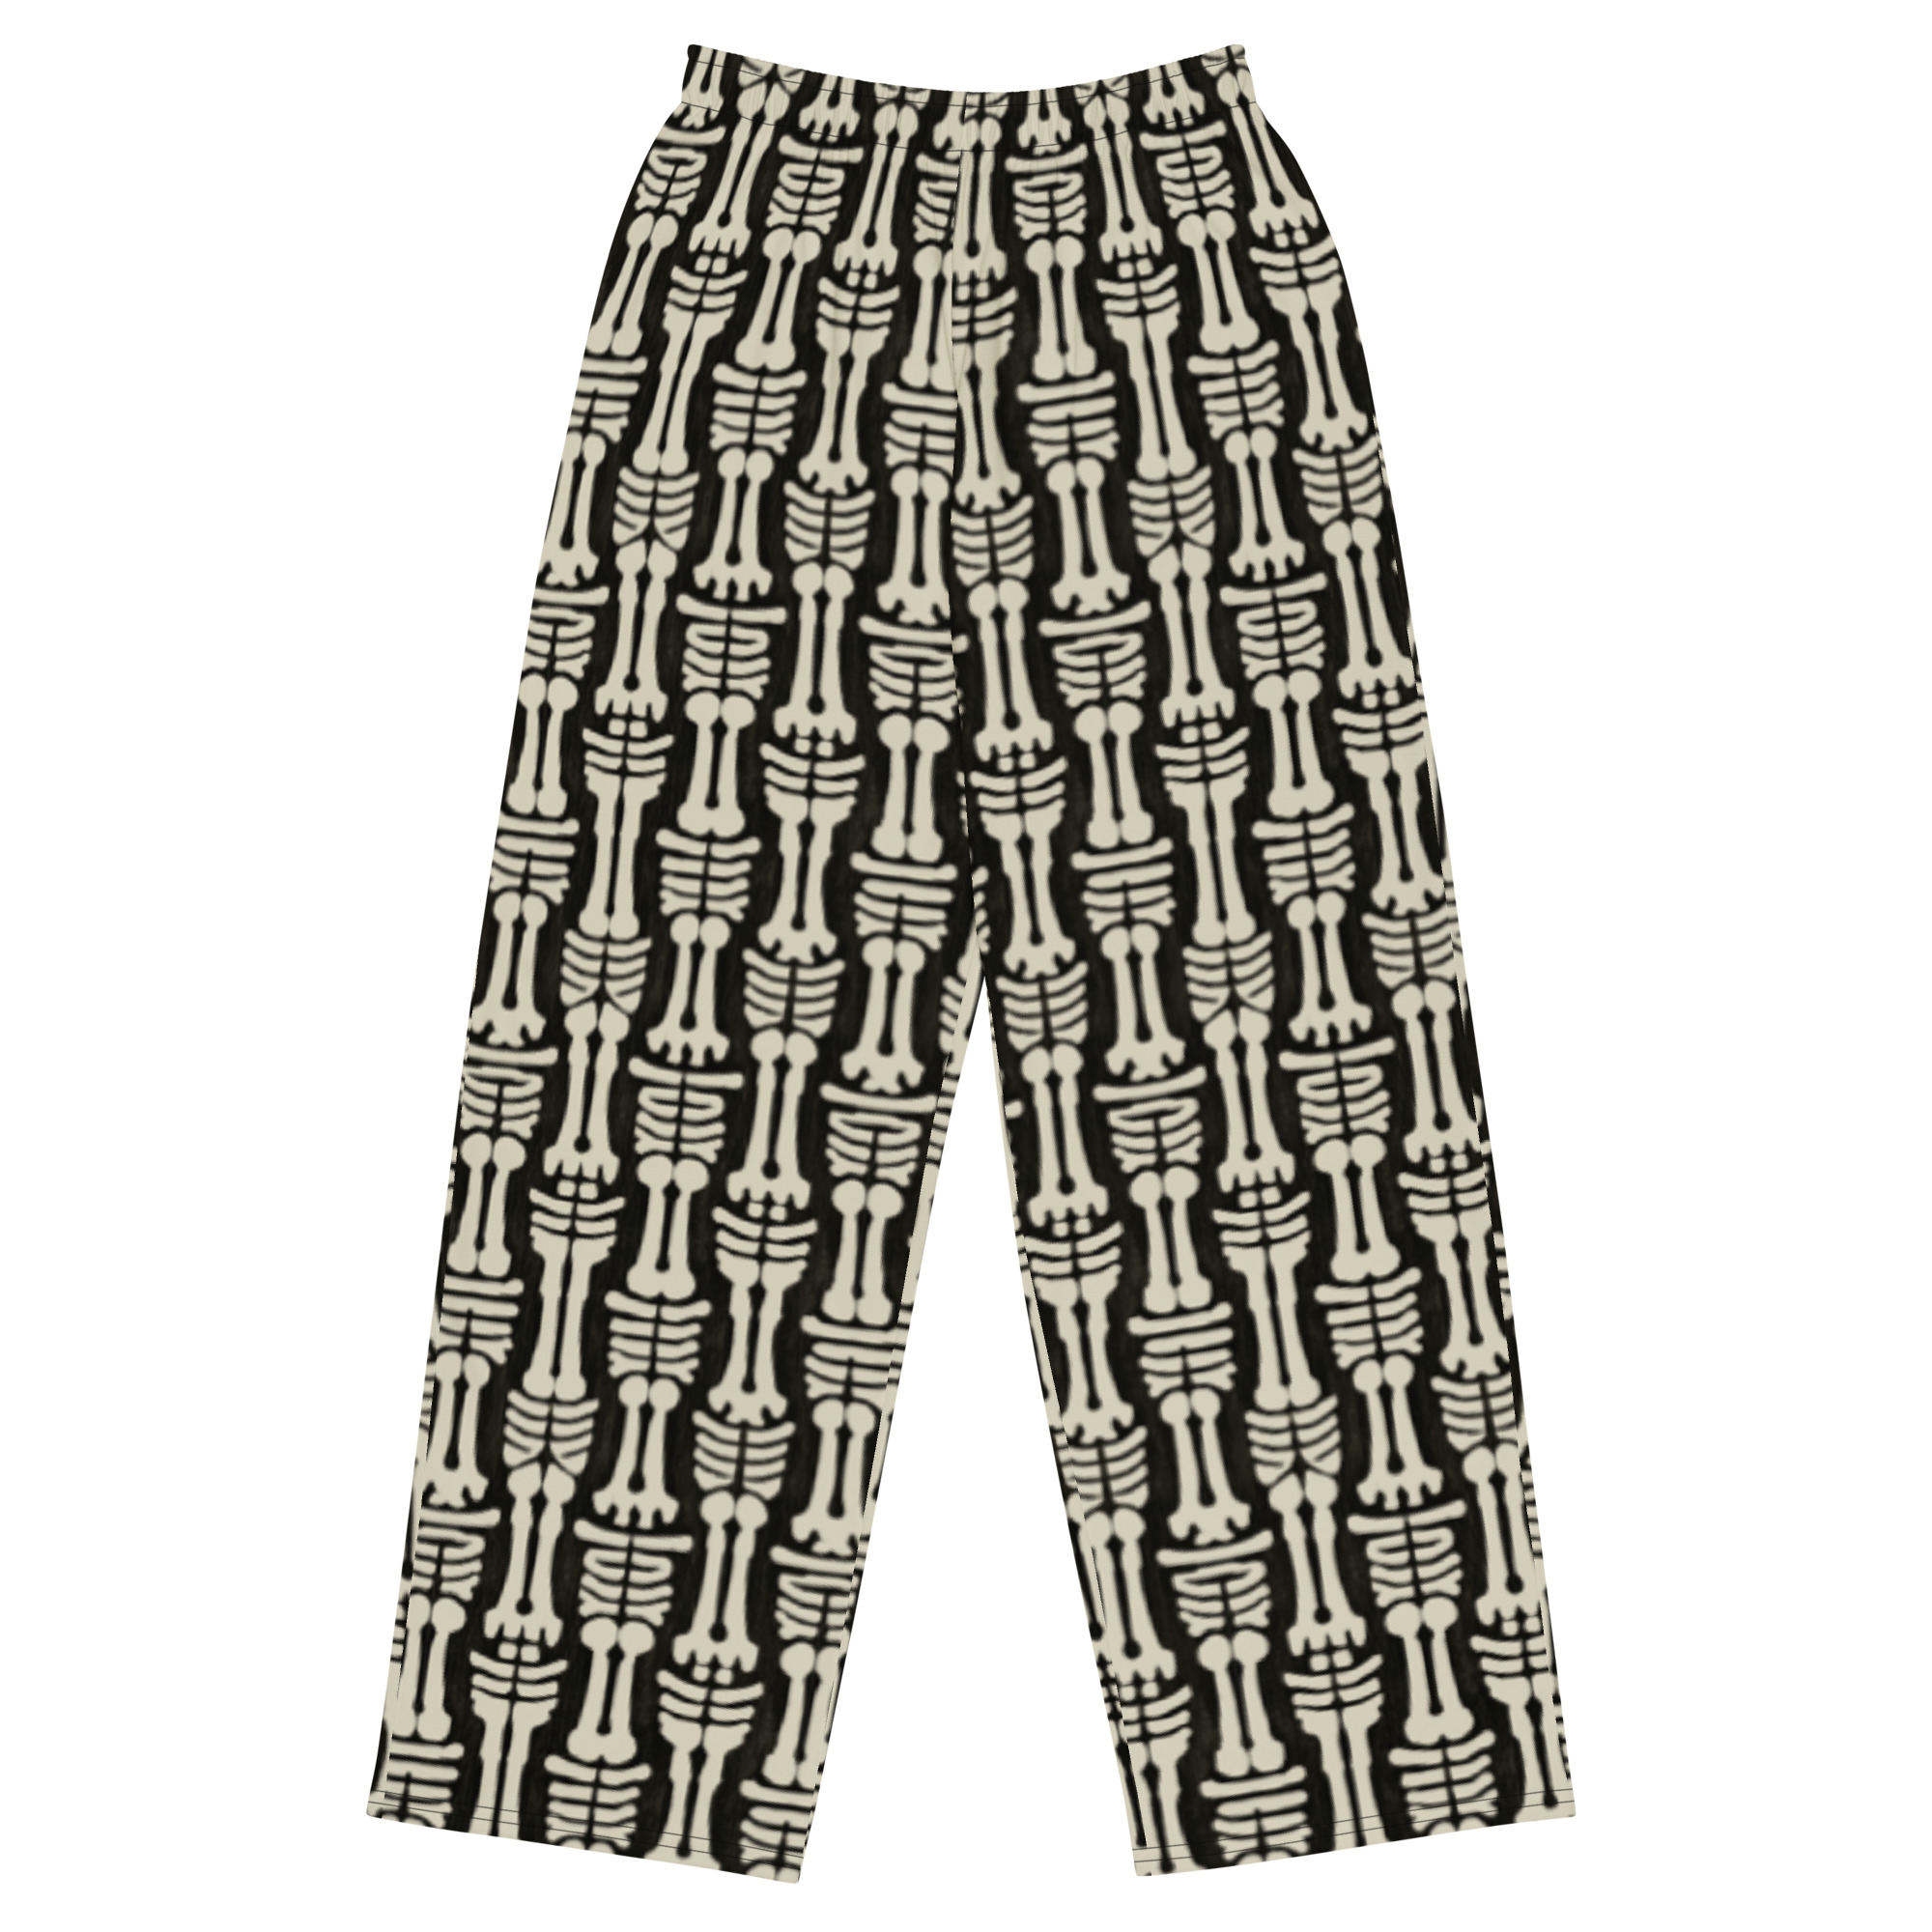 Featured image for “Demented bones - All-over print unisex wide-leg pants”